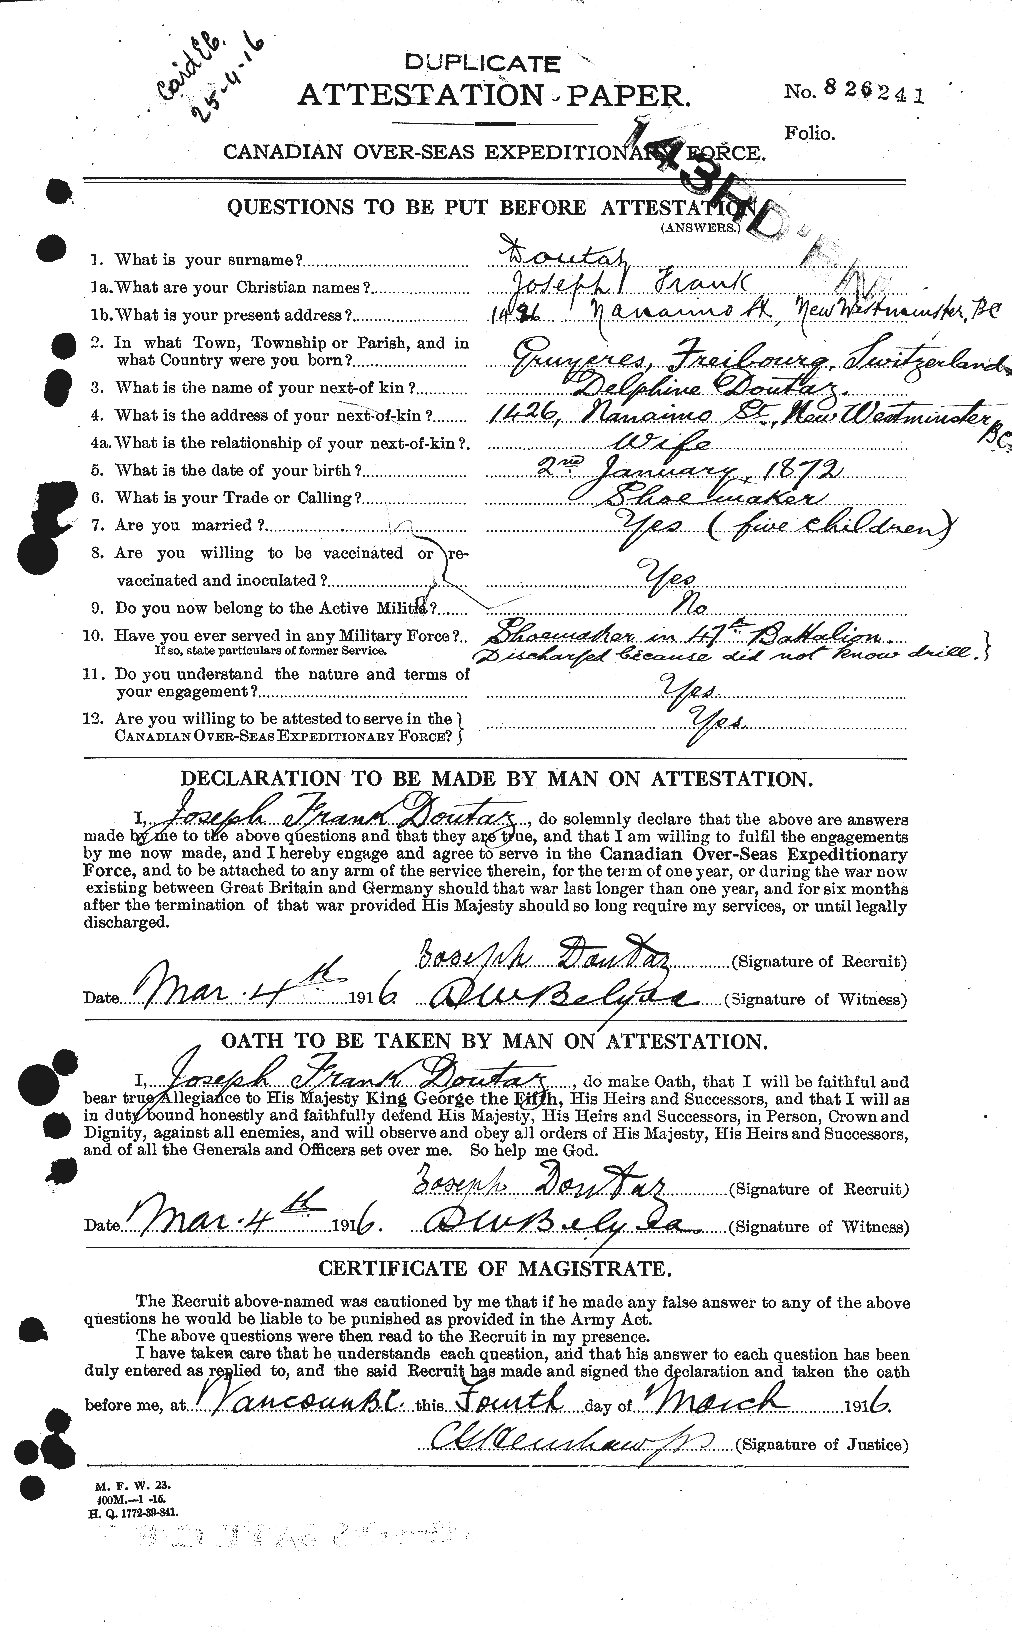 Personnel Records of the First World War - CEF 296912a